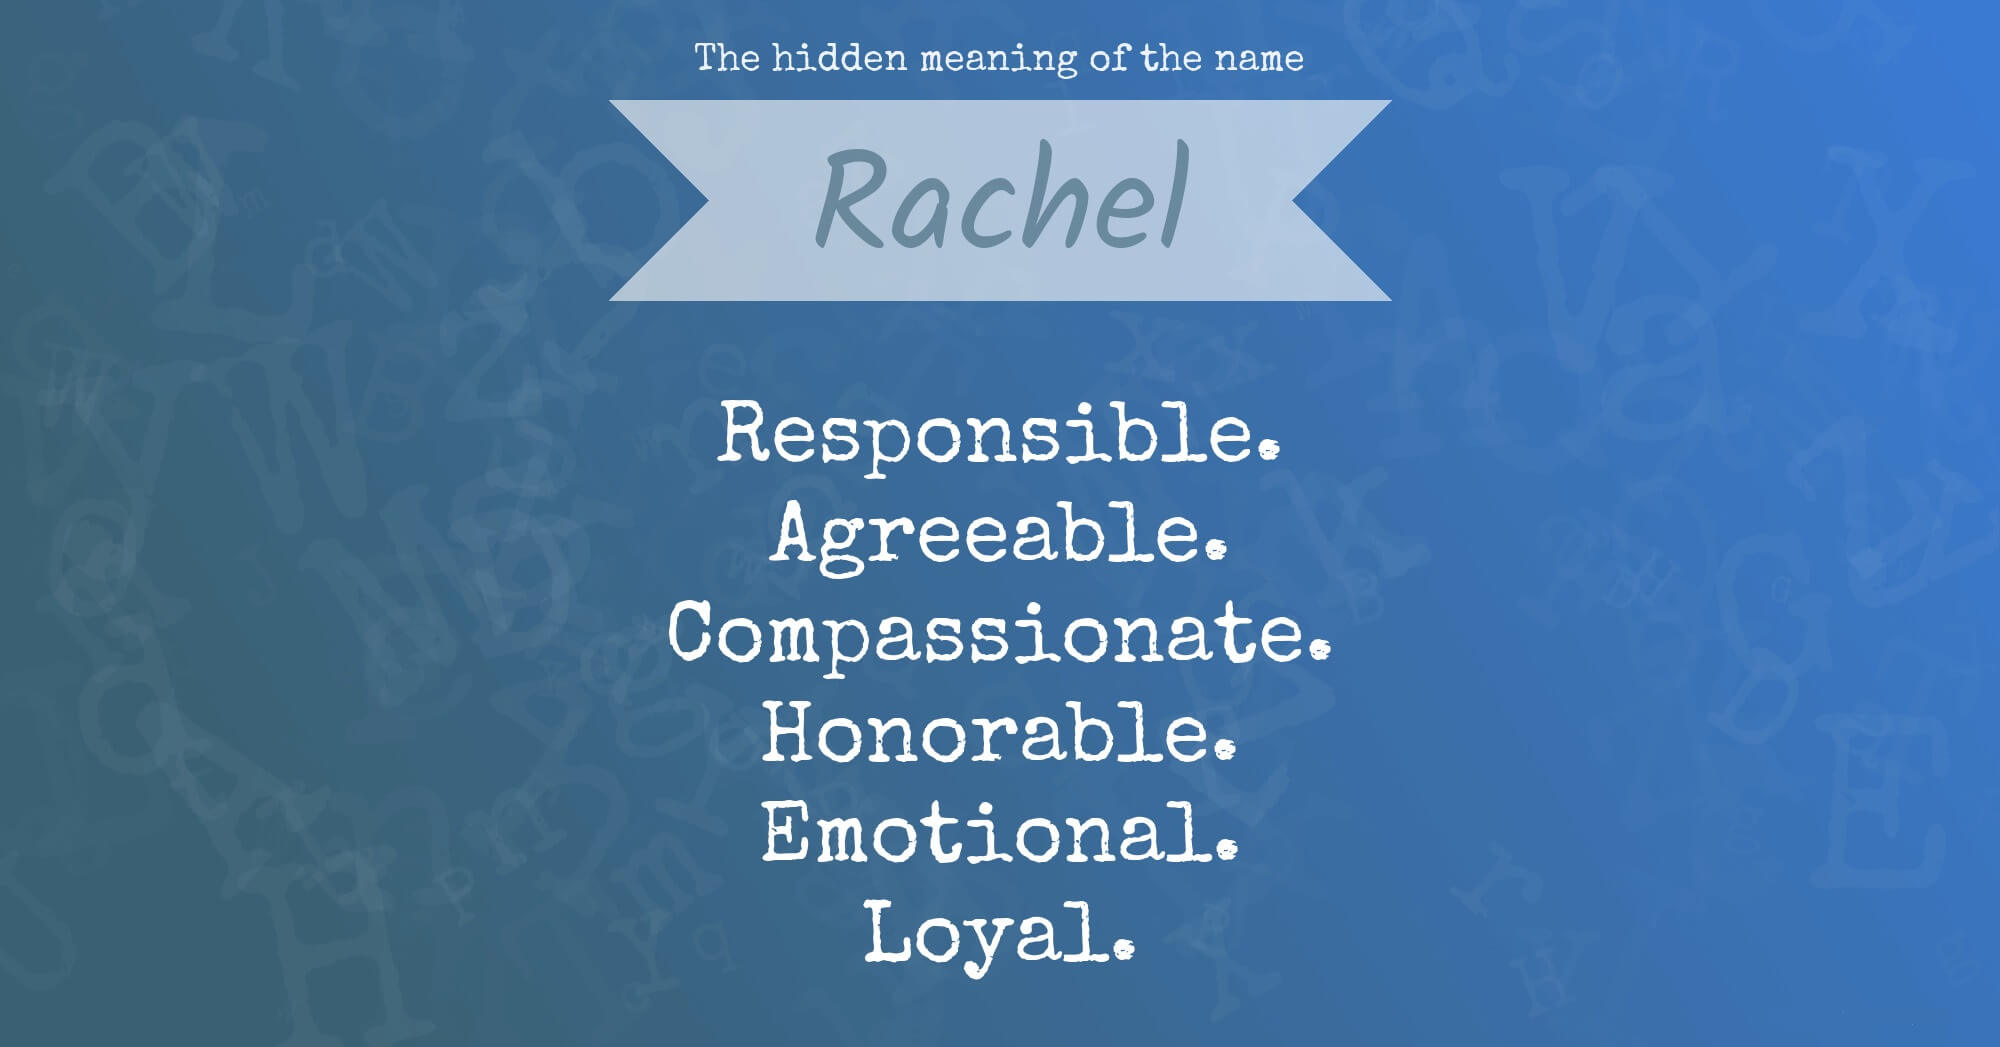 The Hidden Meaning Of The Name Rachel